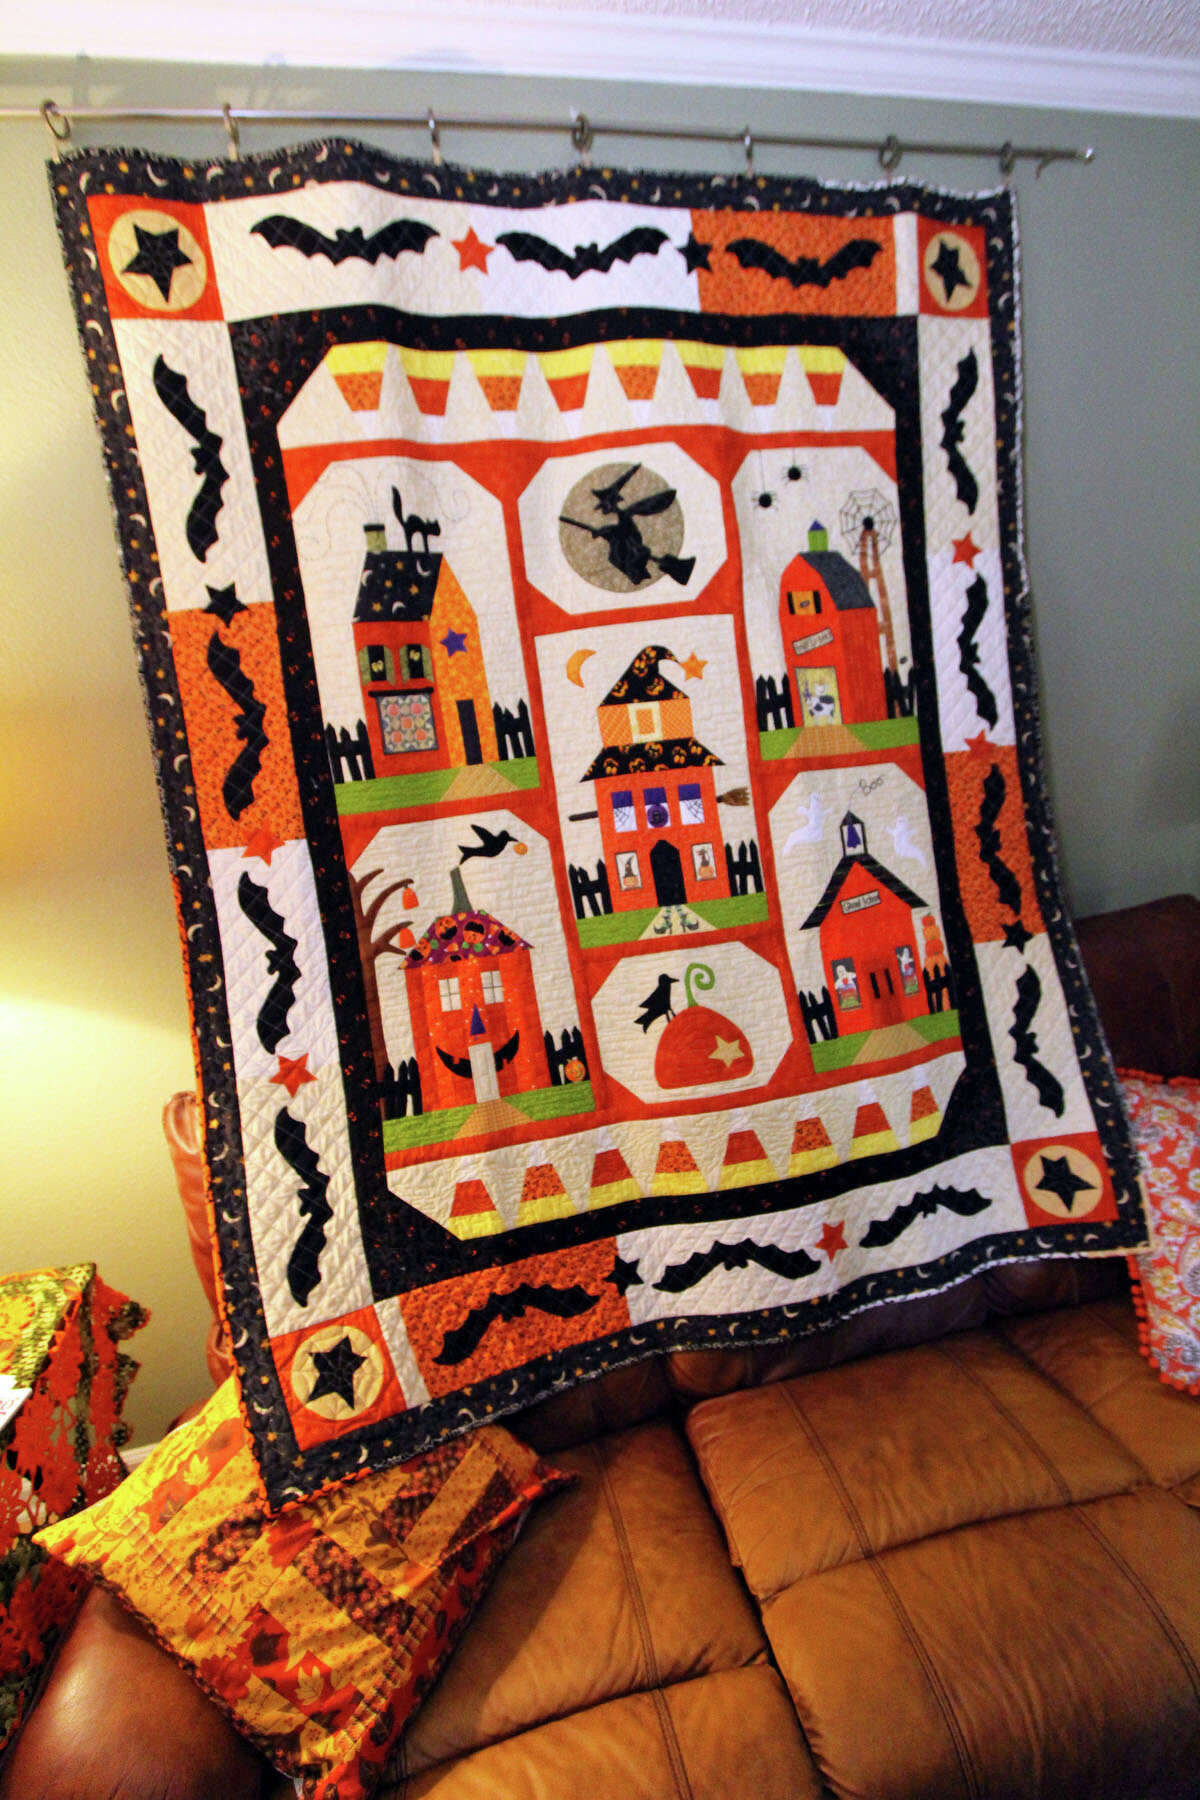 Janet Daniel made the "Sew Spooky" Halloween quilt last year. It's hanging on the wall in the den.